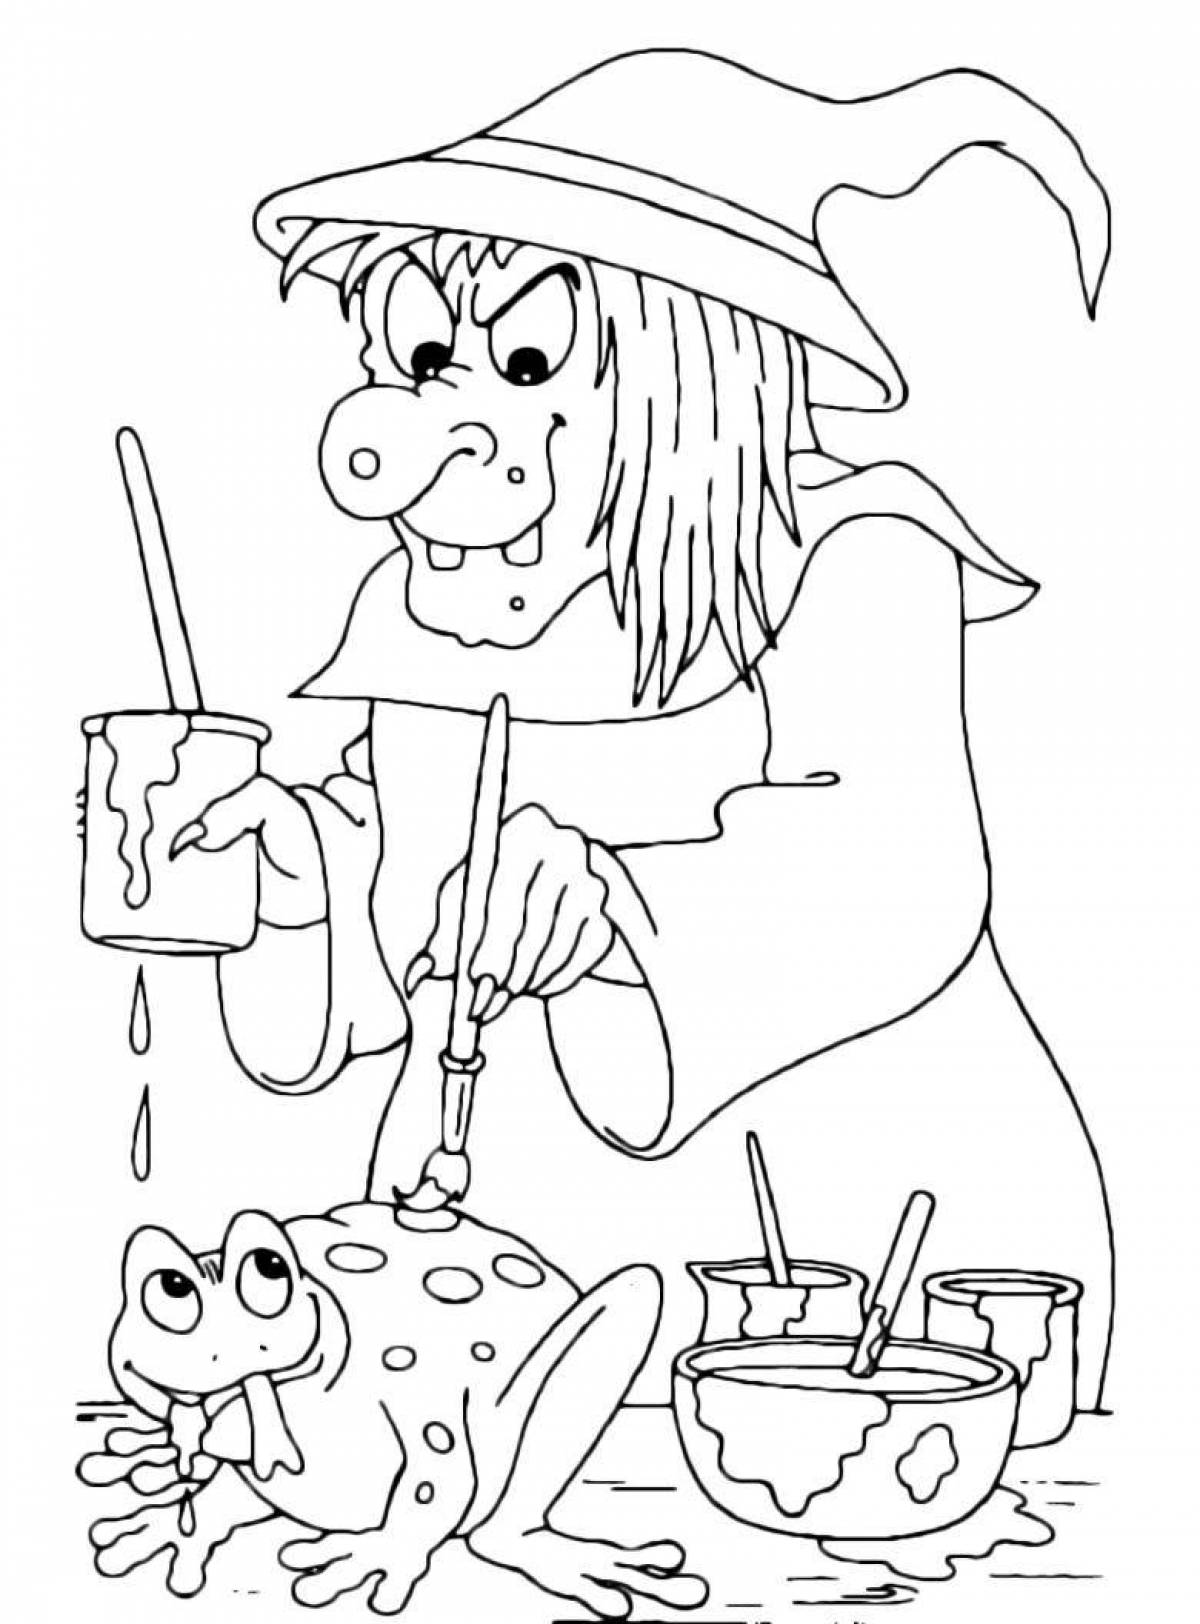 Gorgeous baba yaga coloring for pre-k